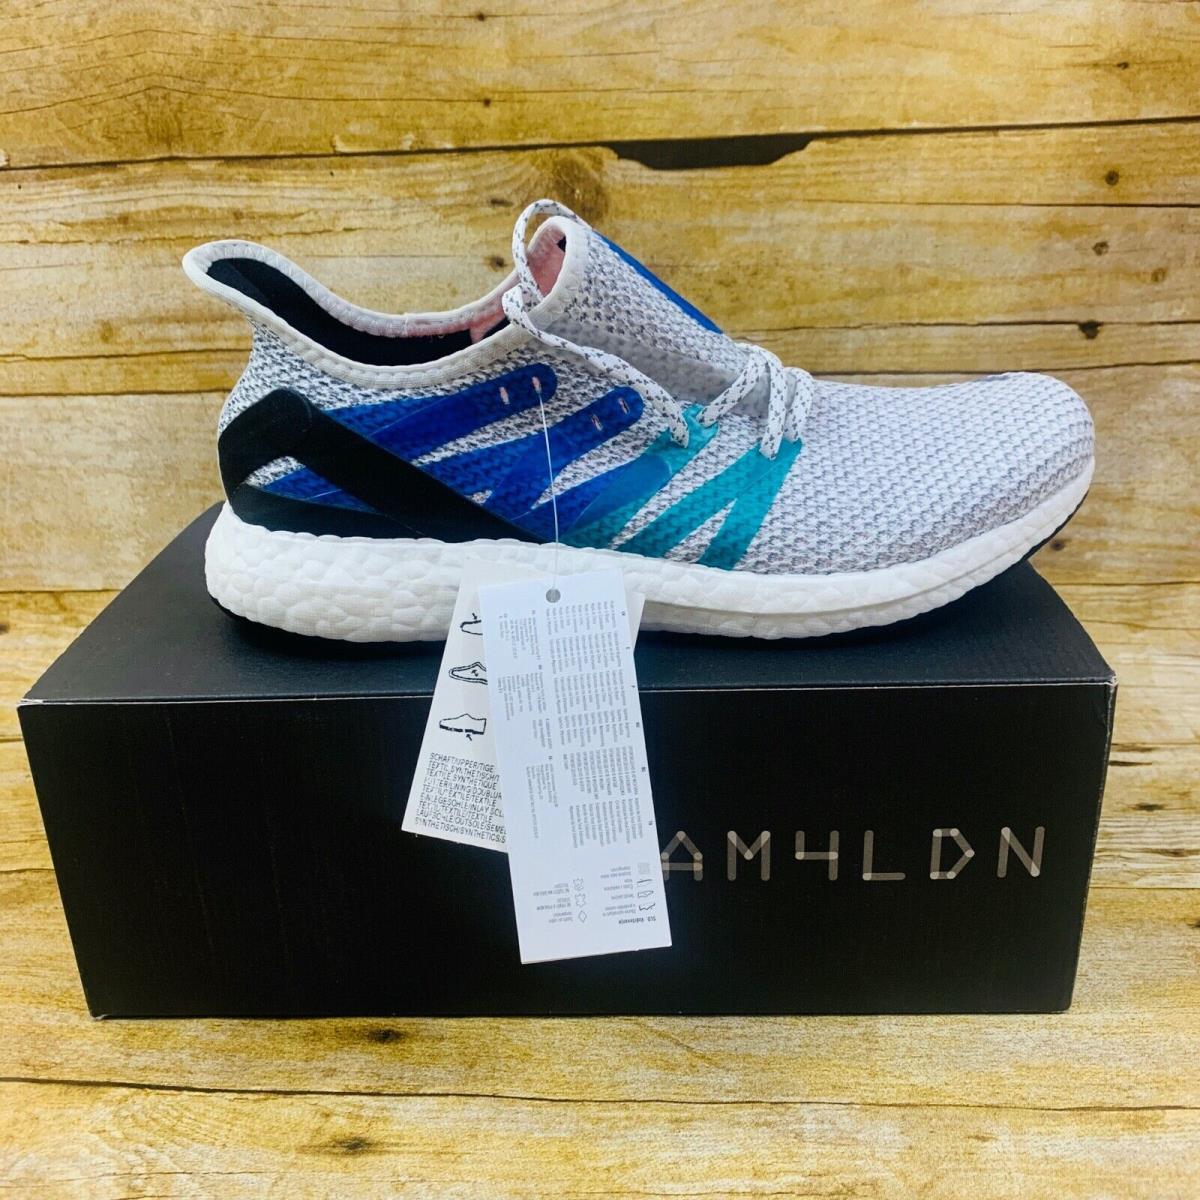 Adidas Ultra Boost Speed Factory AM4 Ldn Germany White 10FutureCraft Off BB6719 692740352541 - Adidas shoes UltraBoost - Multicolor |